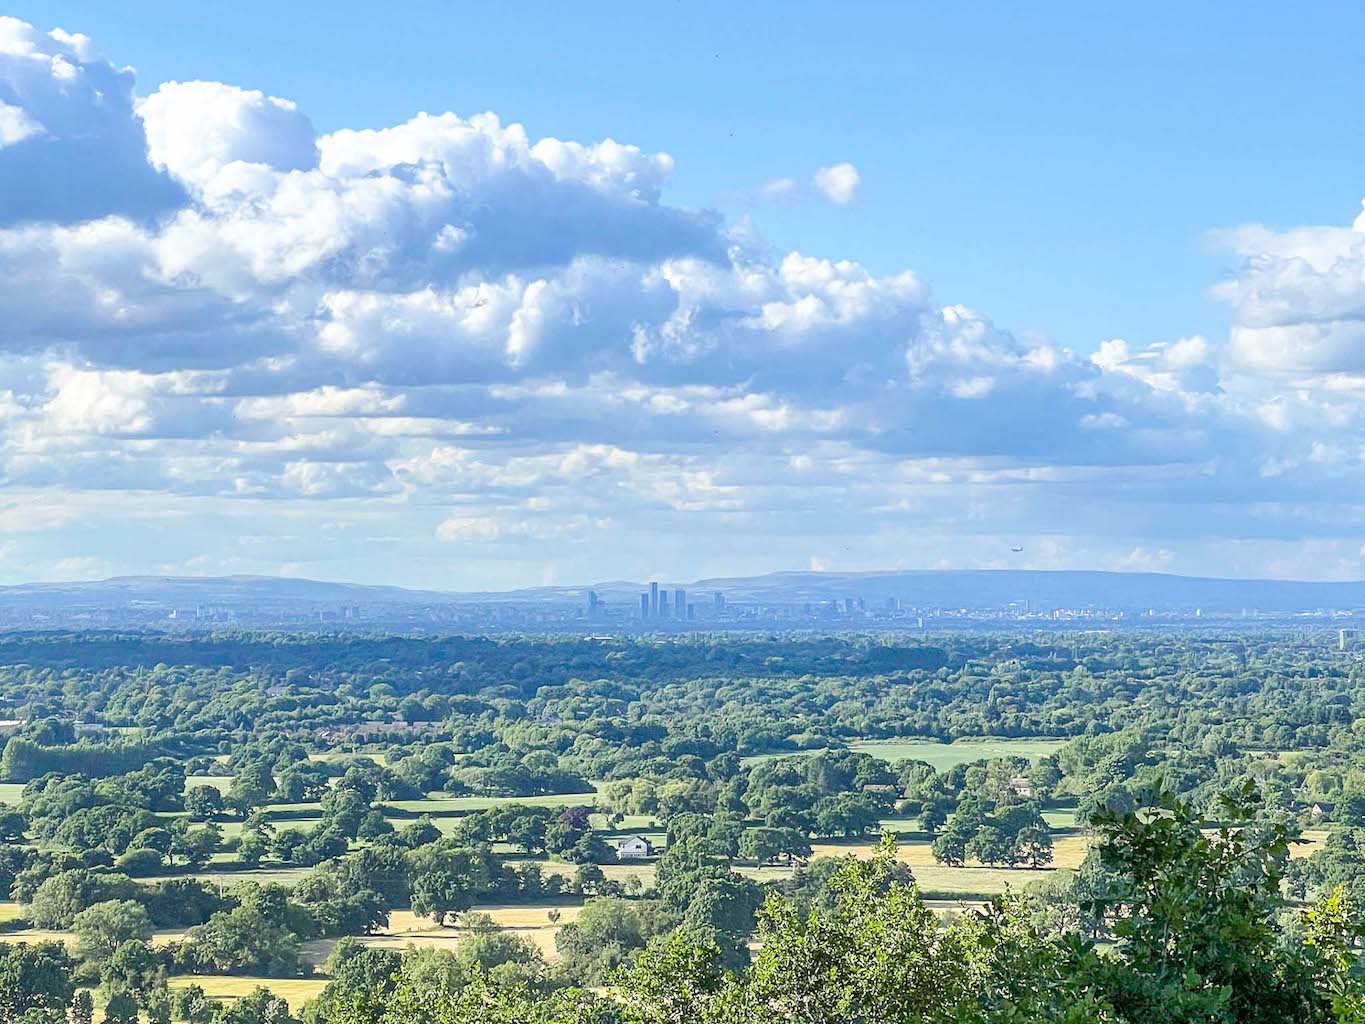 Things to do near Manchester Airport, City Skyline from Alderley Edge